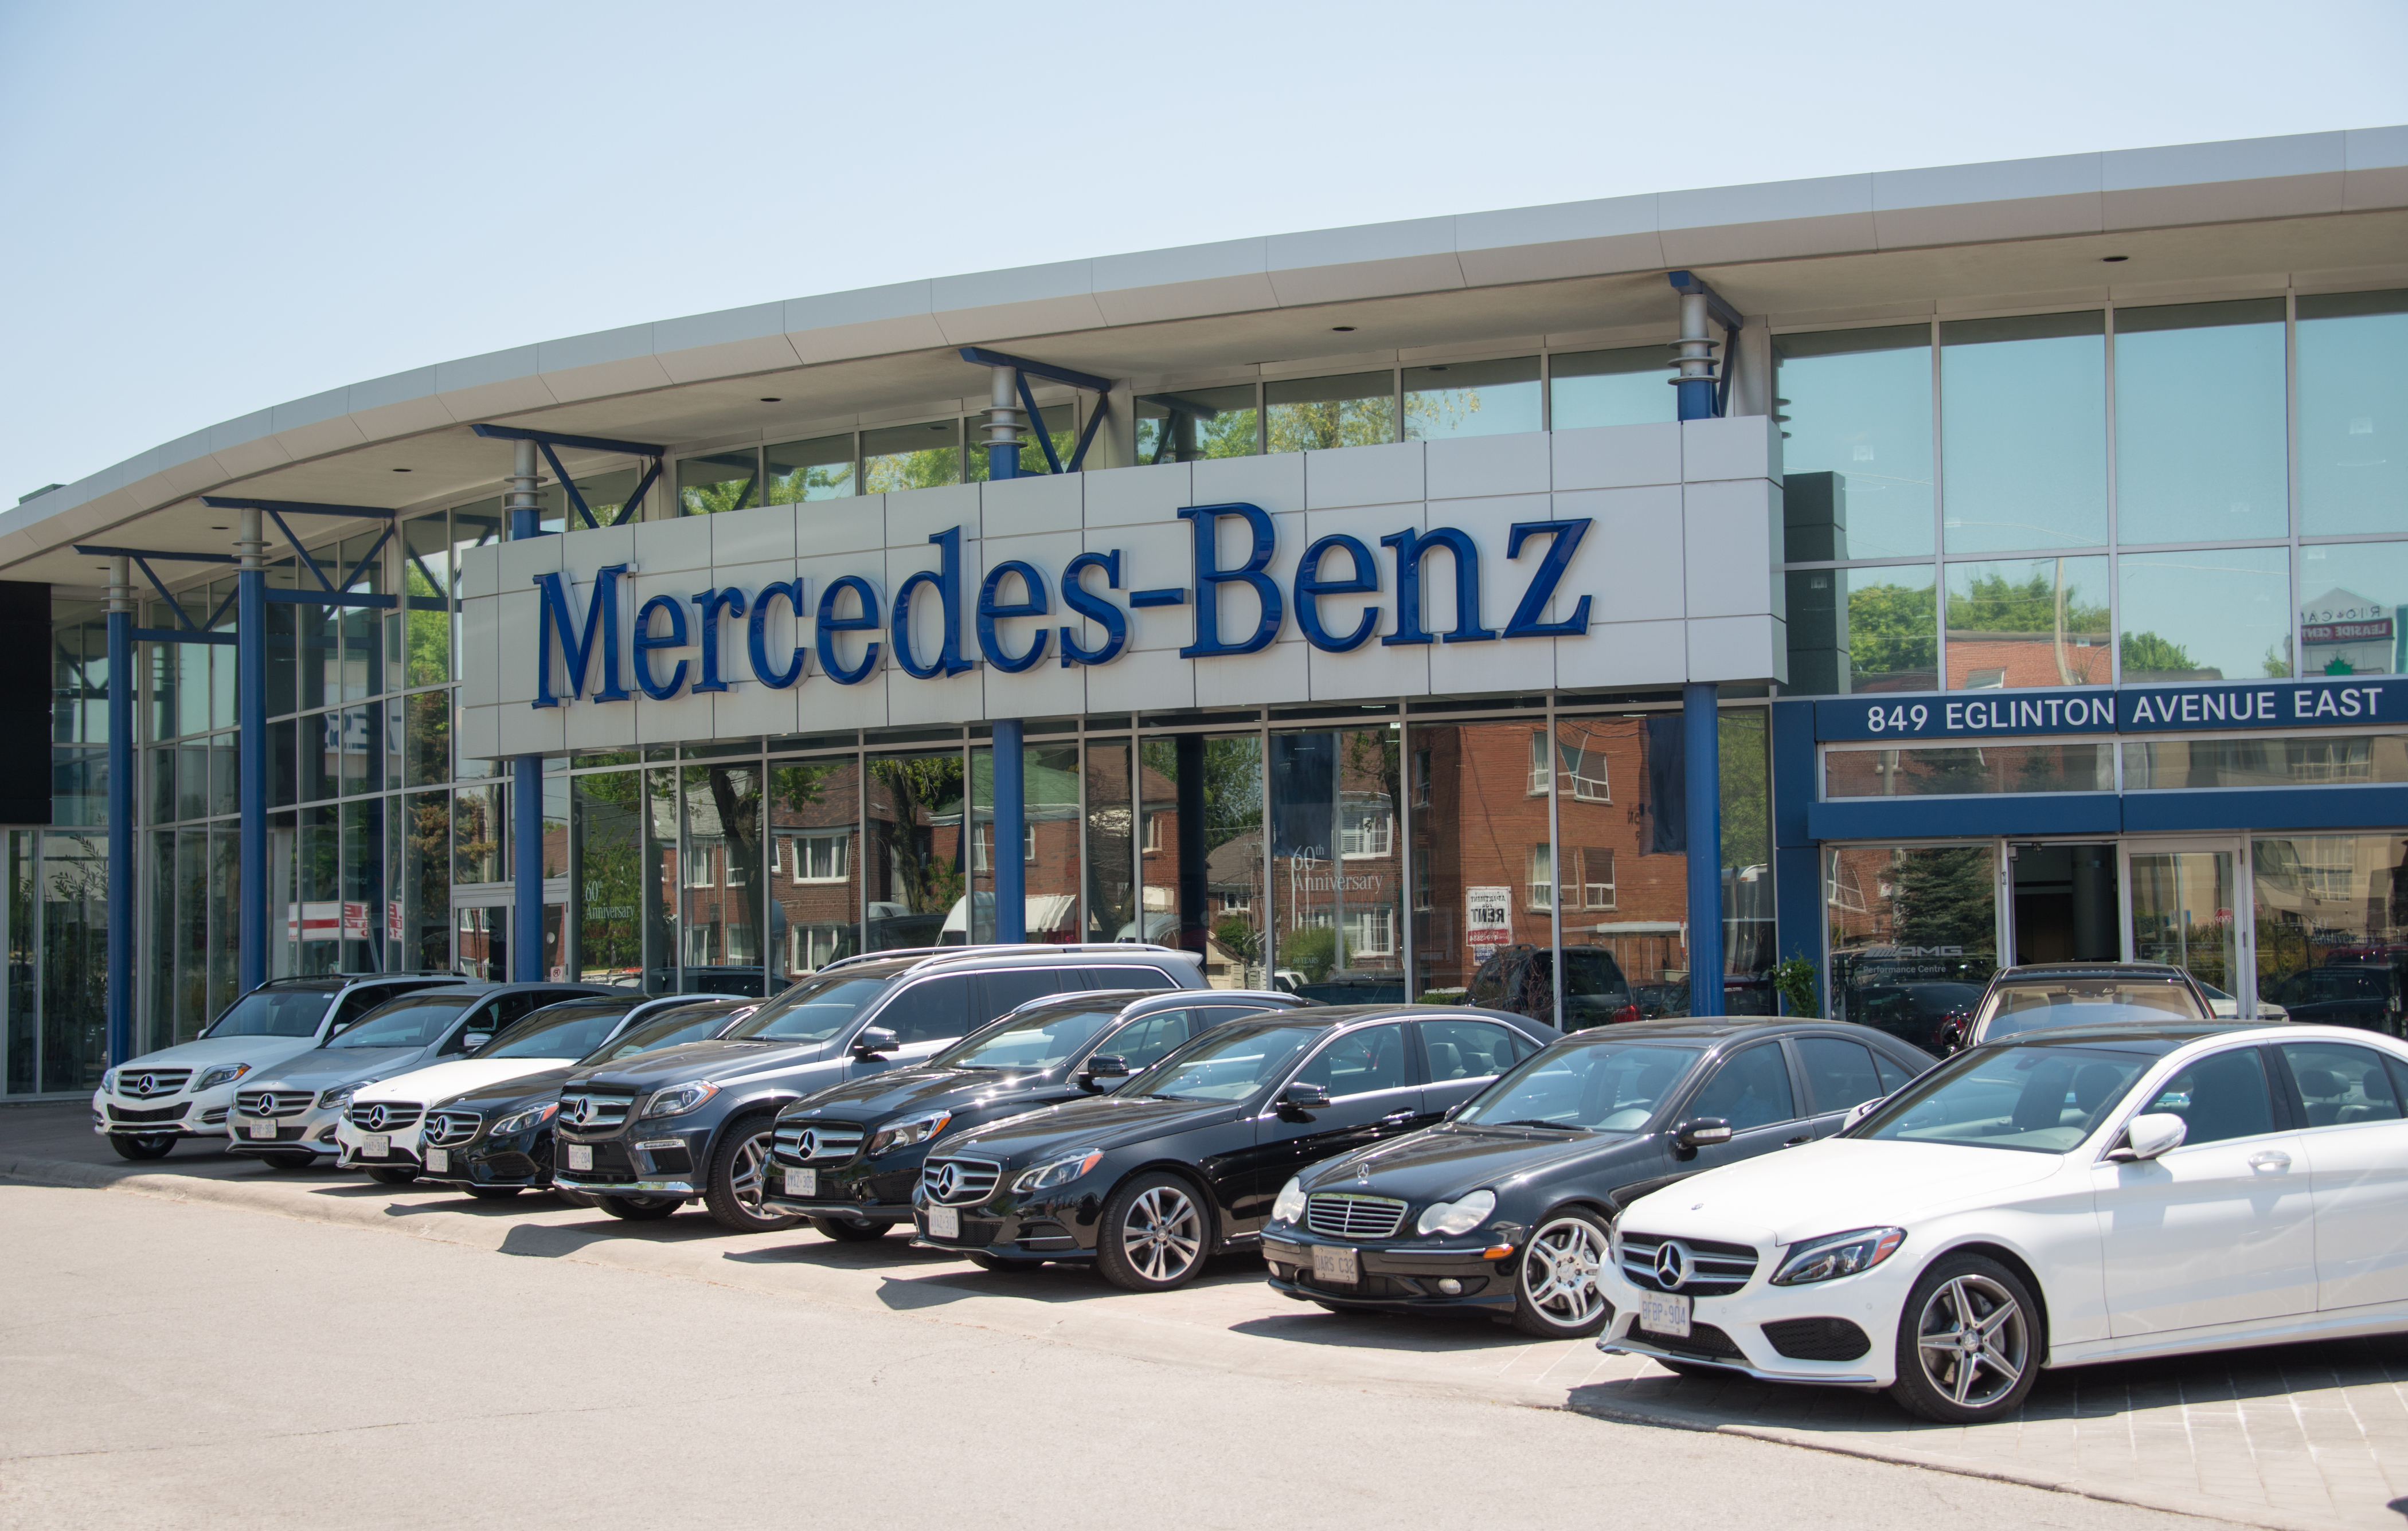 Mercedes Benz dealer in a city, outdoor display of the